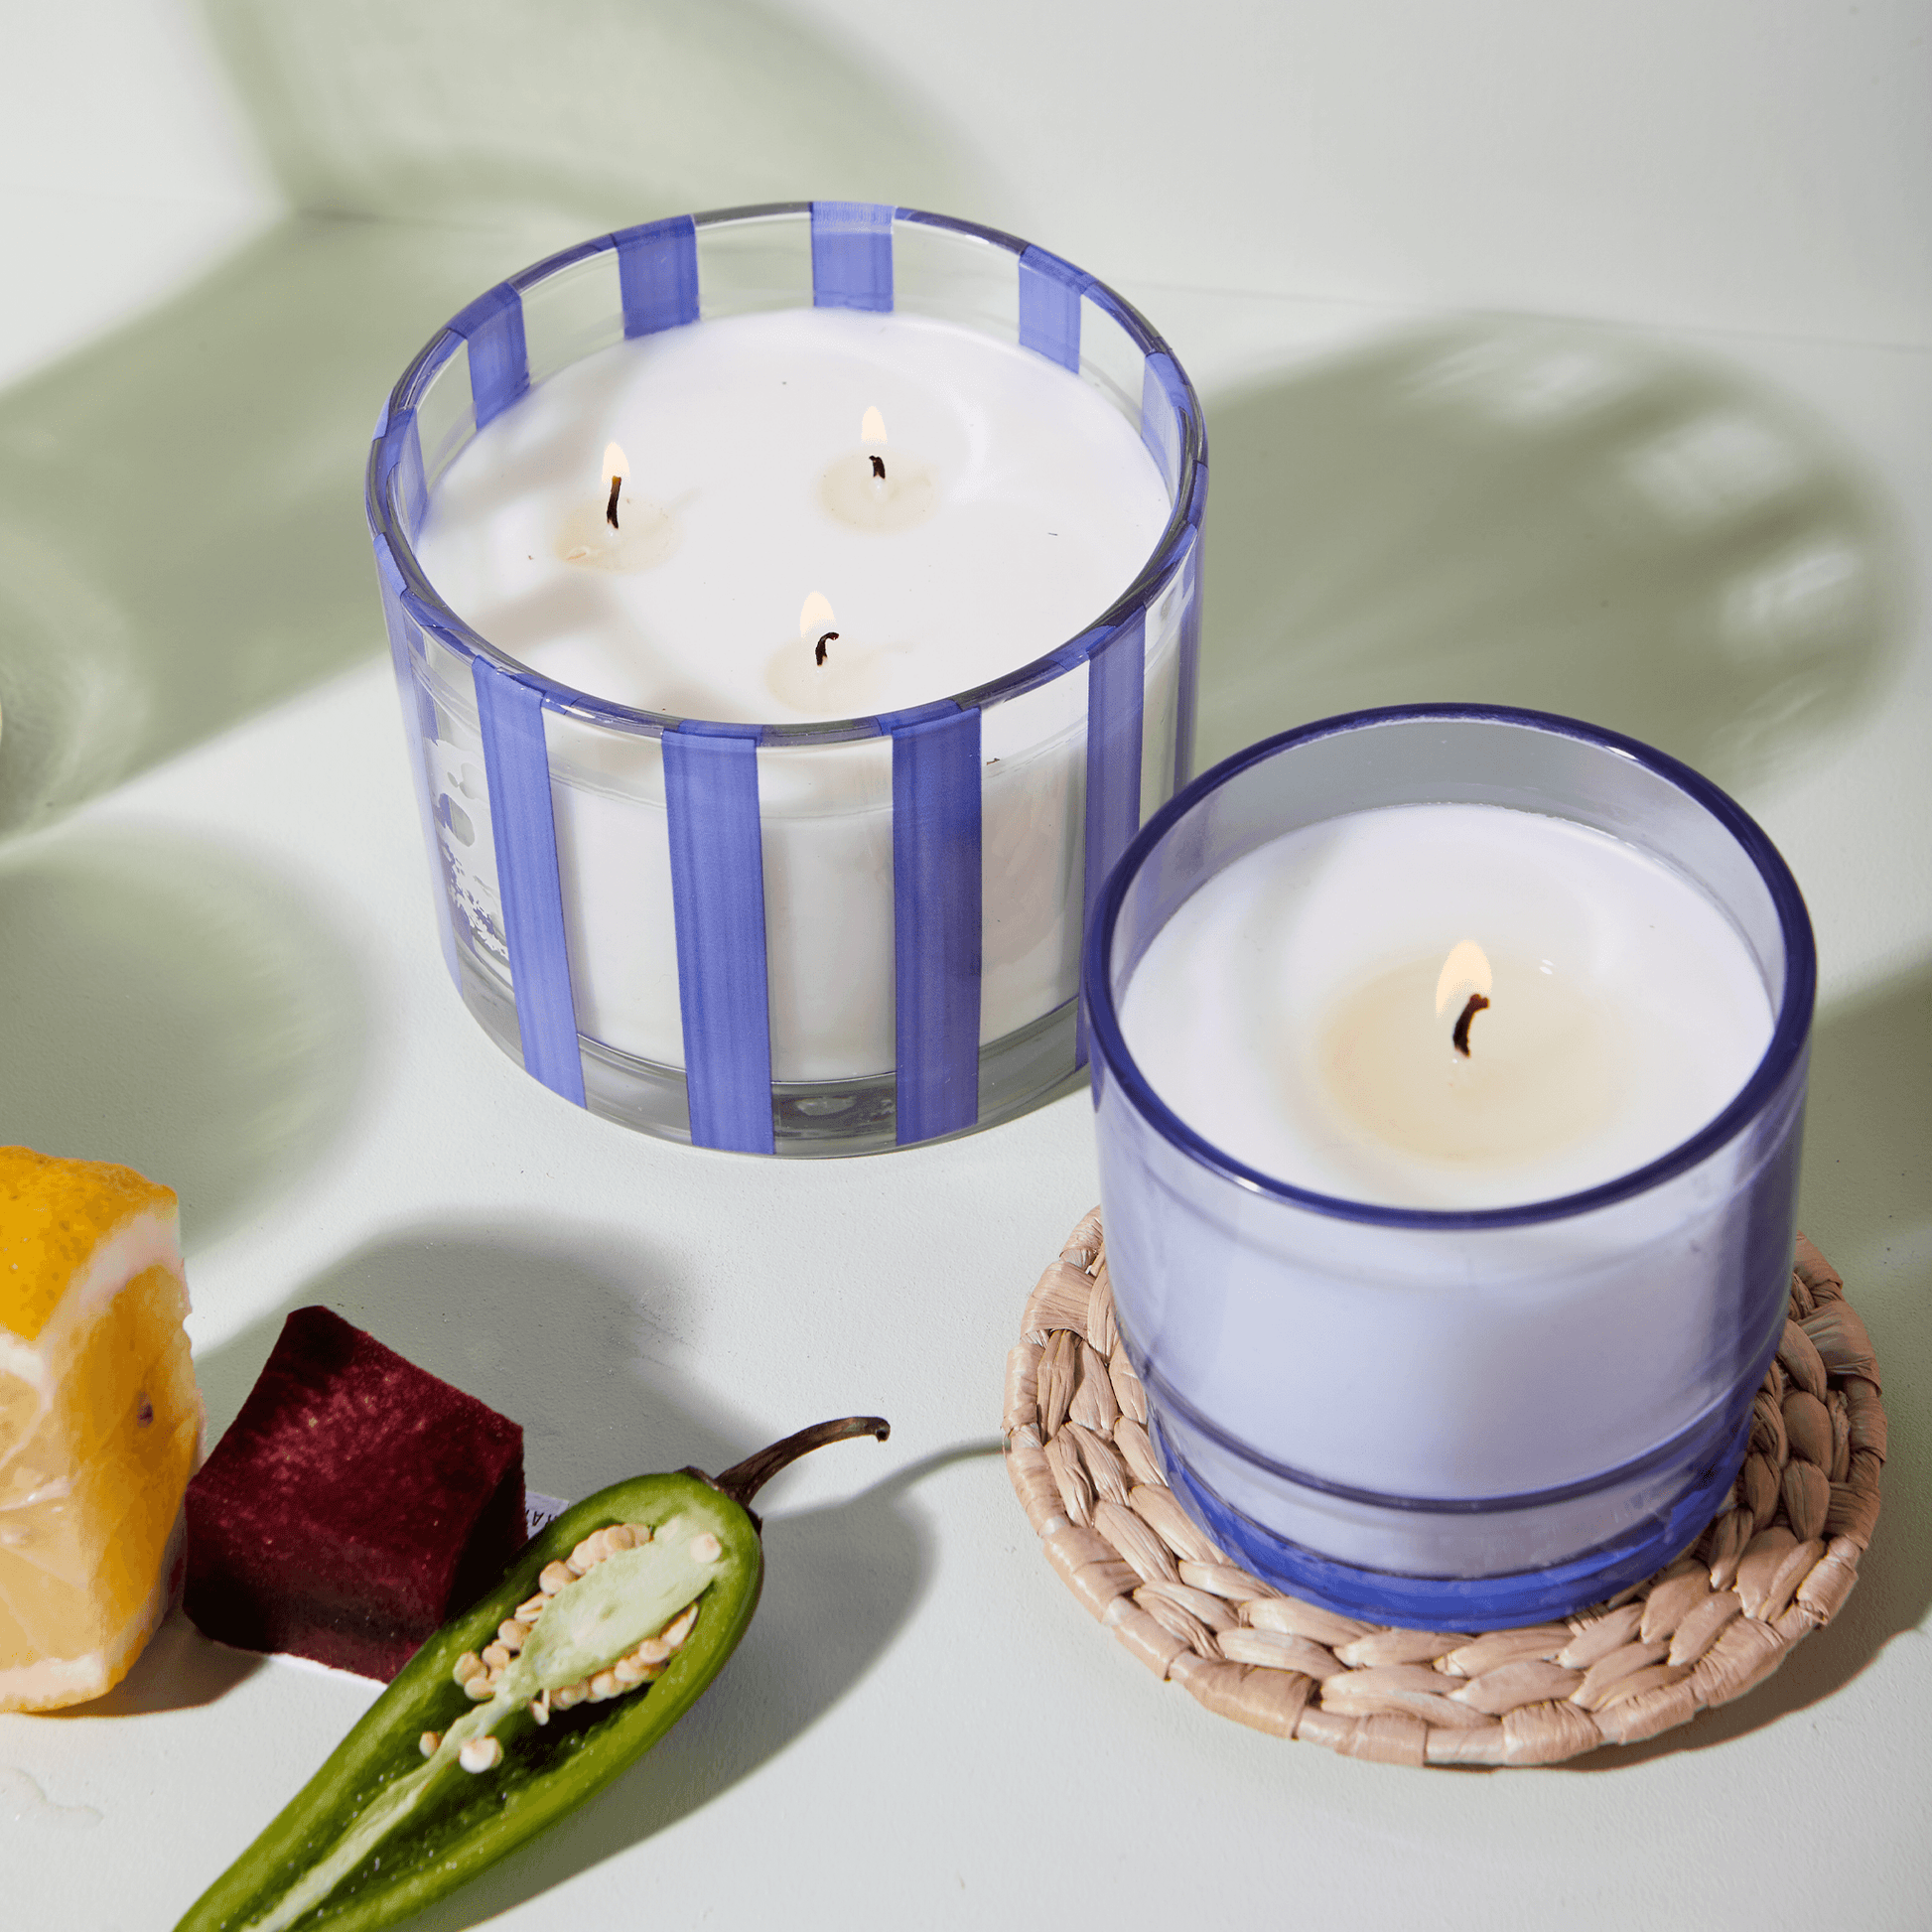 7 oz Al Fresco candle with a blue-tinted glass vessel pictured next to the larger 12oz Al Fresco candle of the same color.